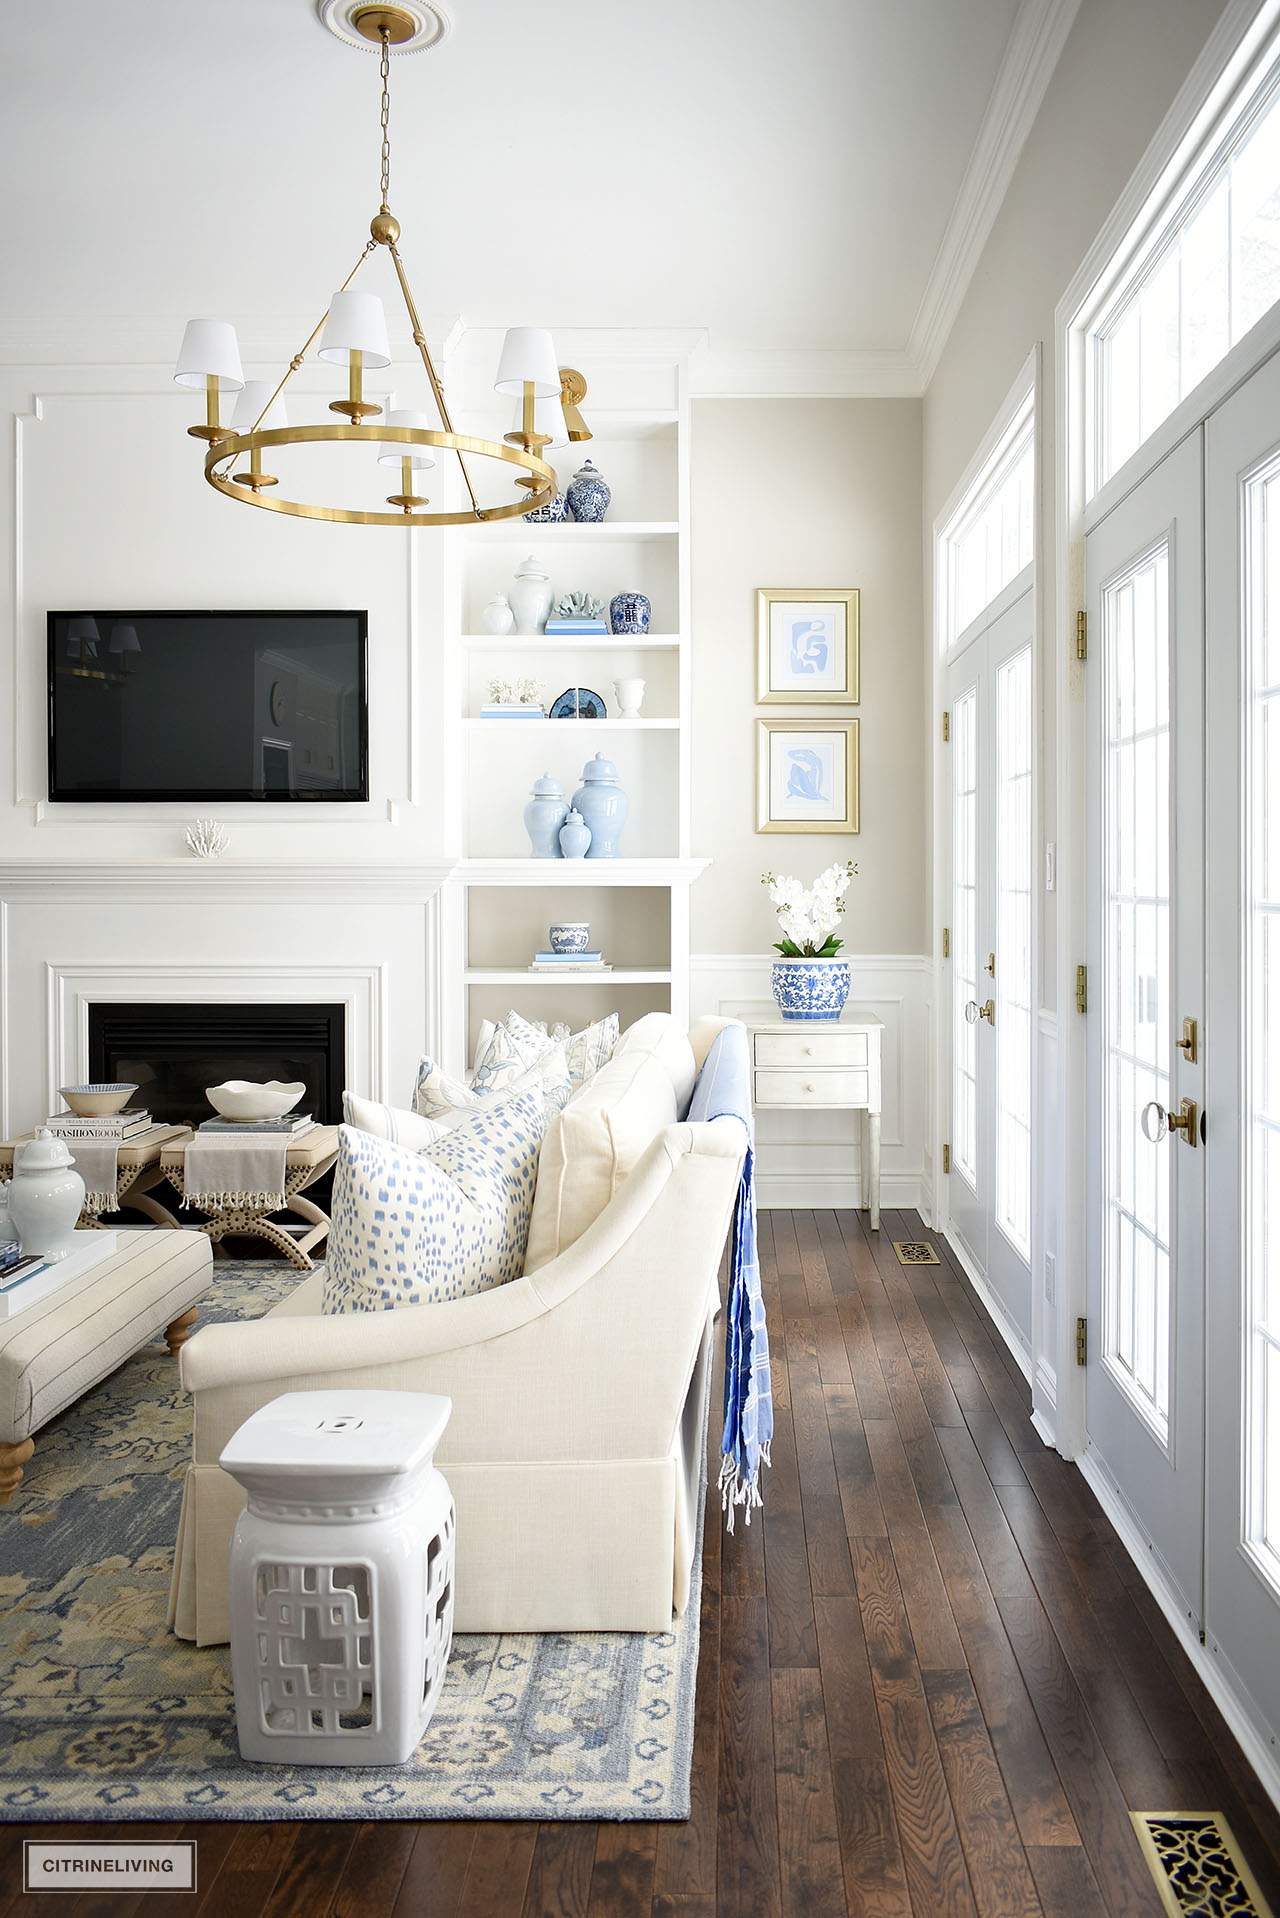 Living room decorated for spring with pretty blue and white decor and accessories.